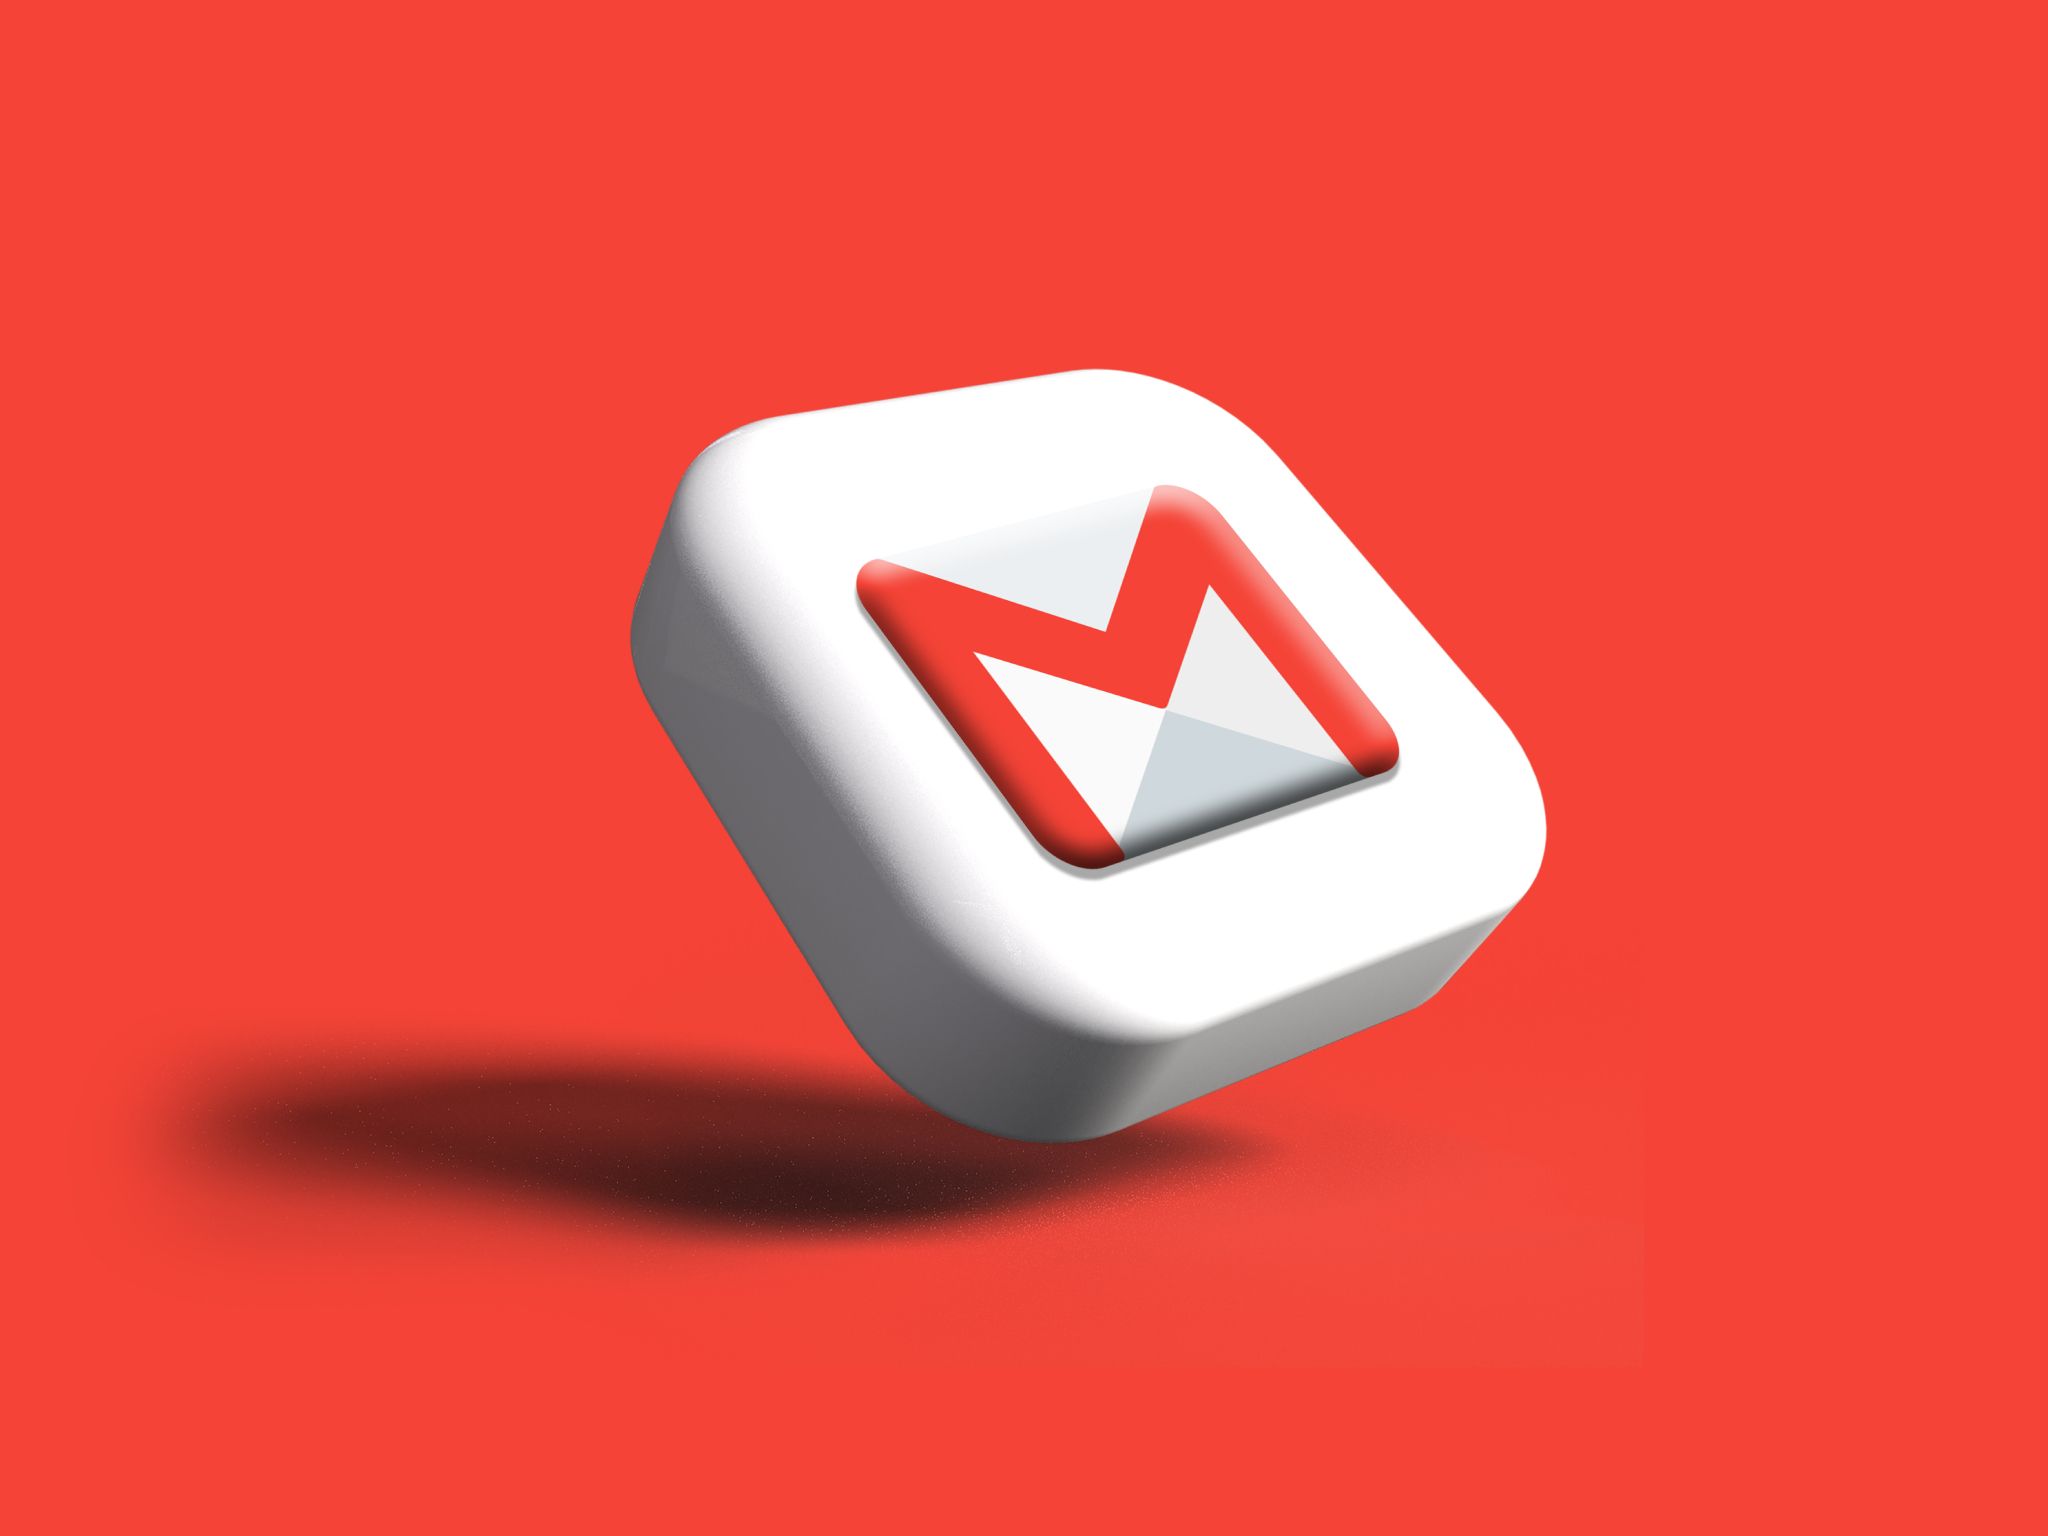 Gmail logo against a red backdrop